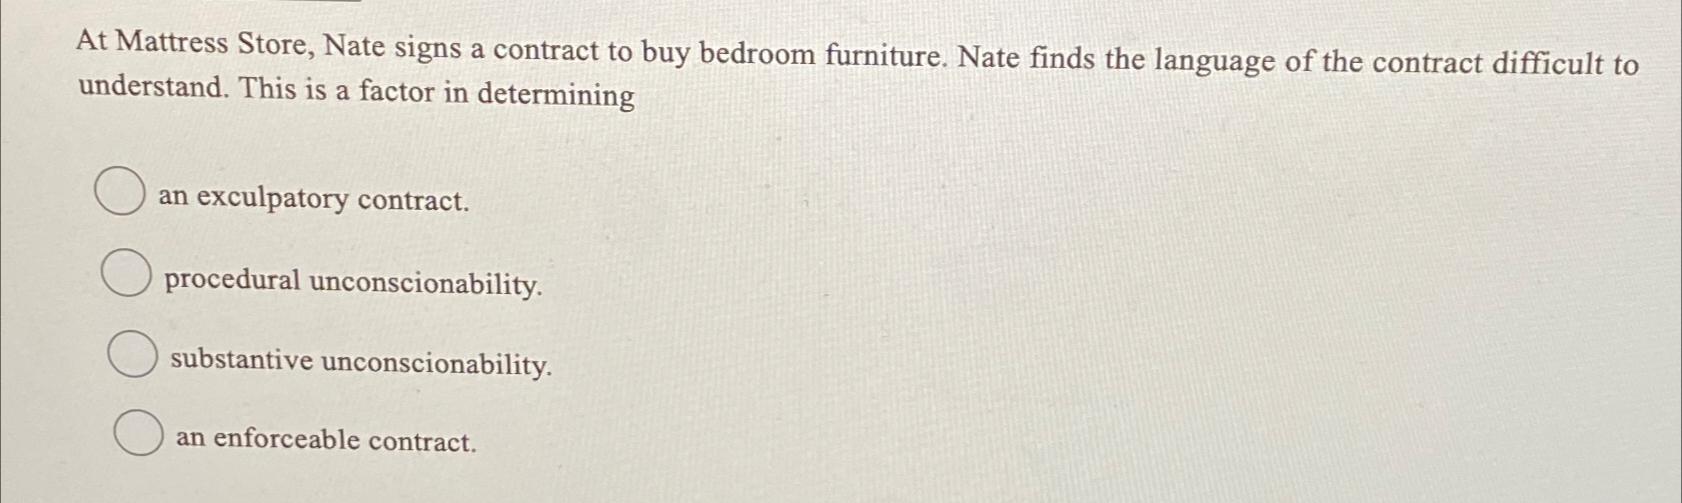 At Mattress Store, Nate signs a contract to buy bedroom furniture. Nate finds the language of the contract